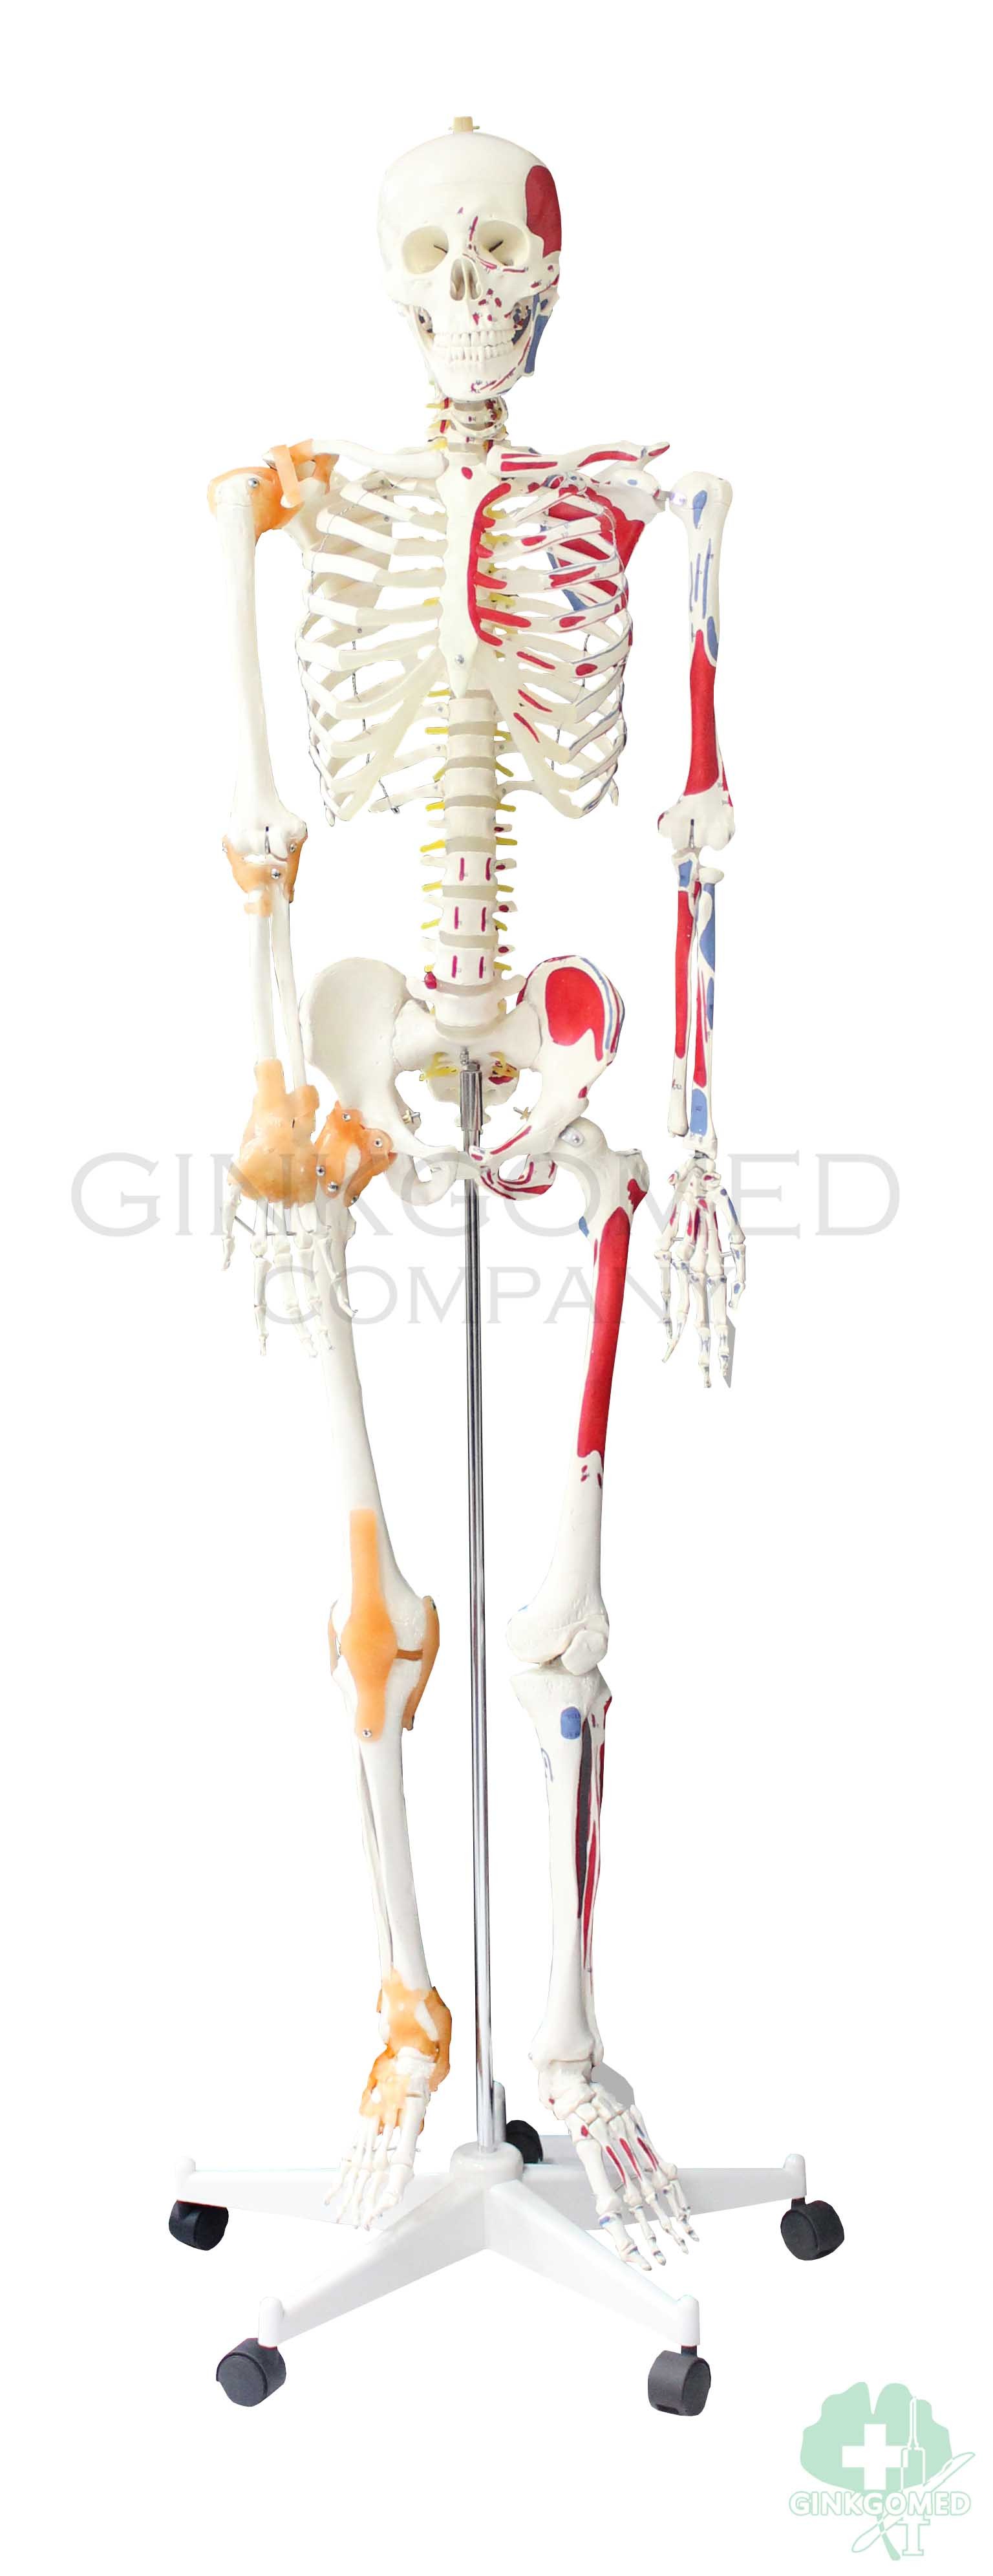 GM-010058 Hangable Human Skeleton with Ligaments Muscular Labeling